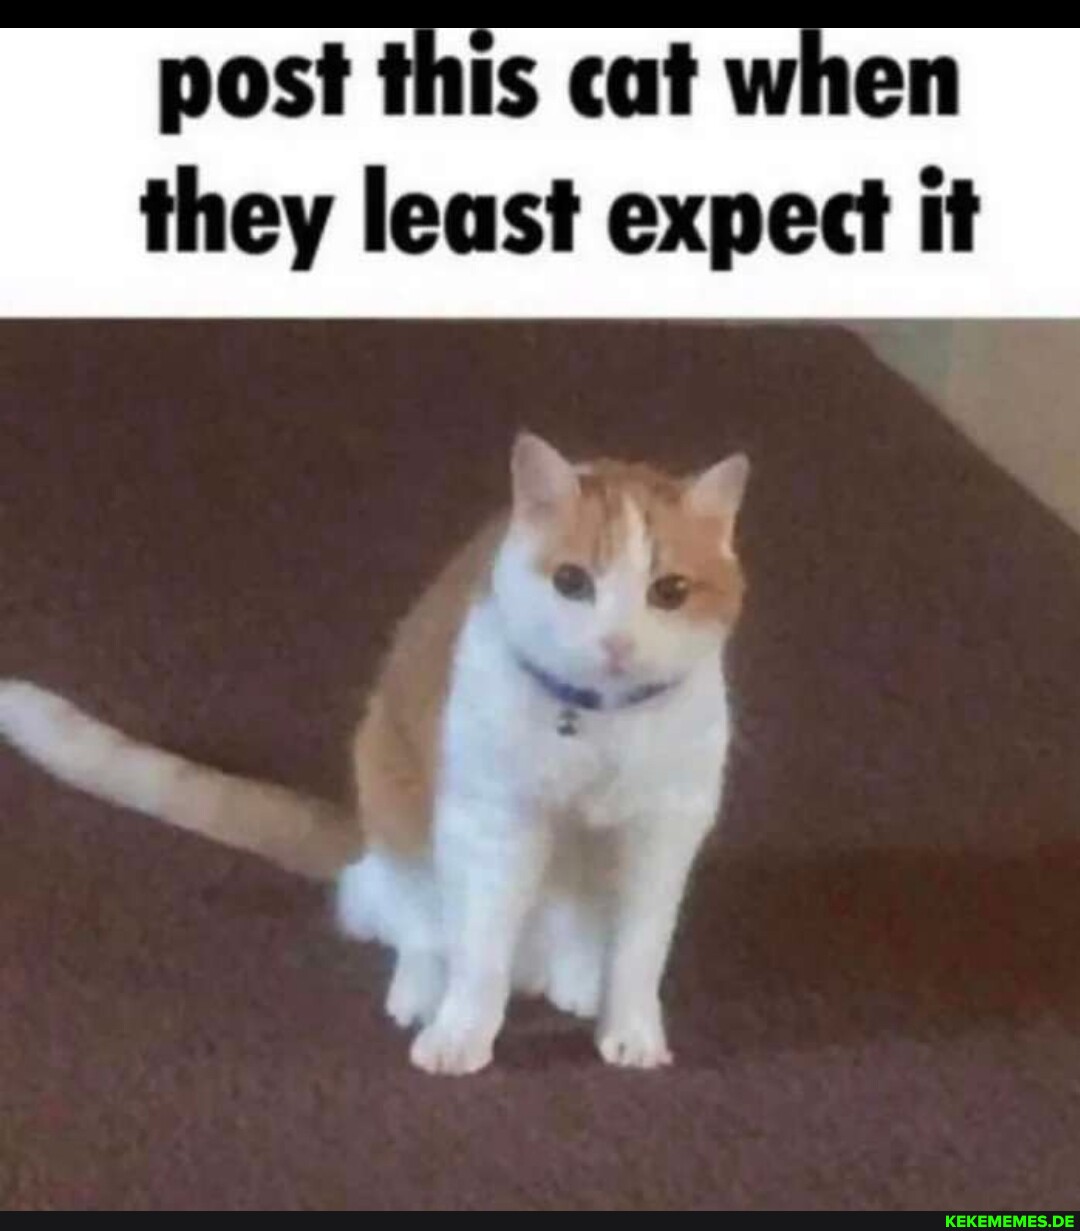 post this cat when they least expect it